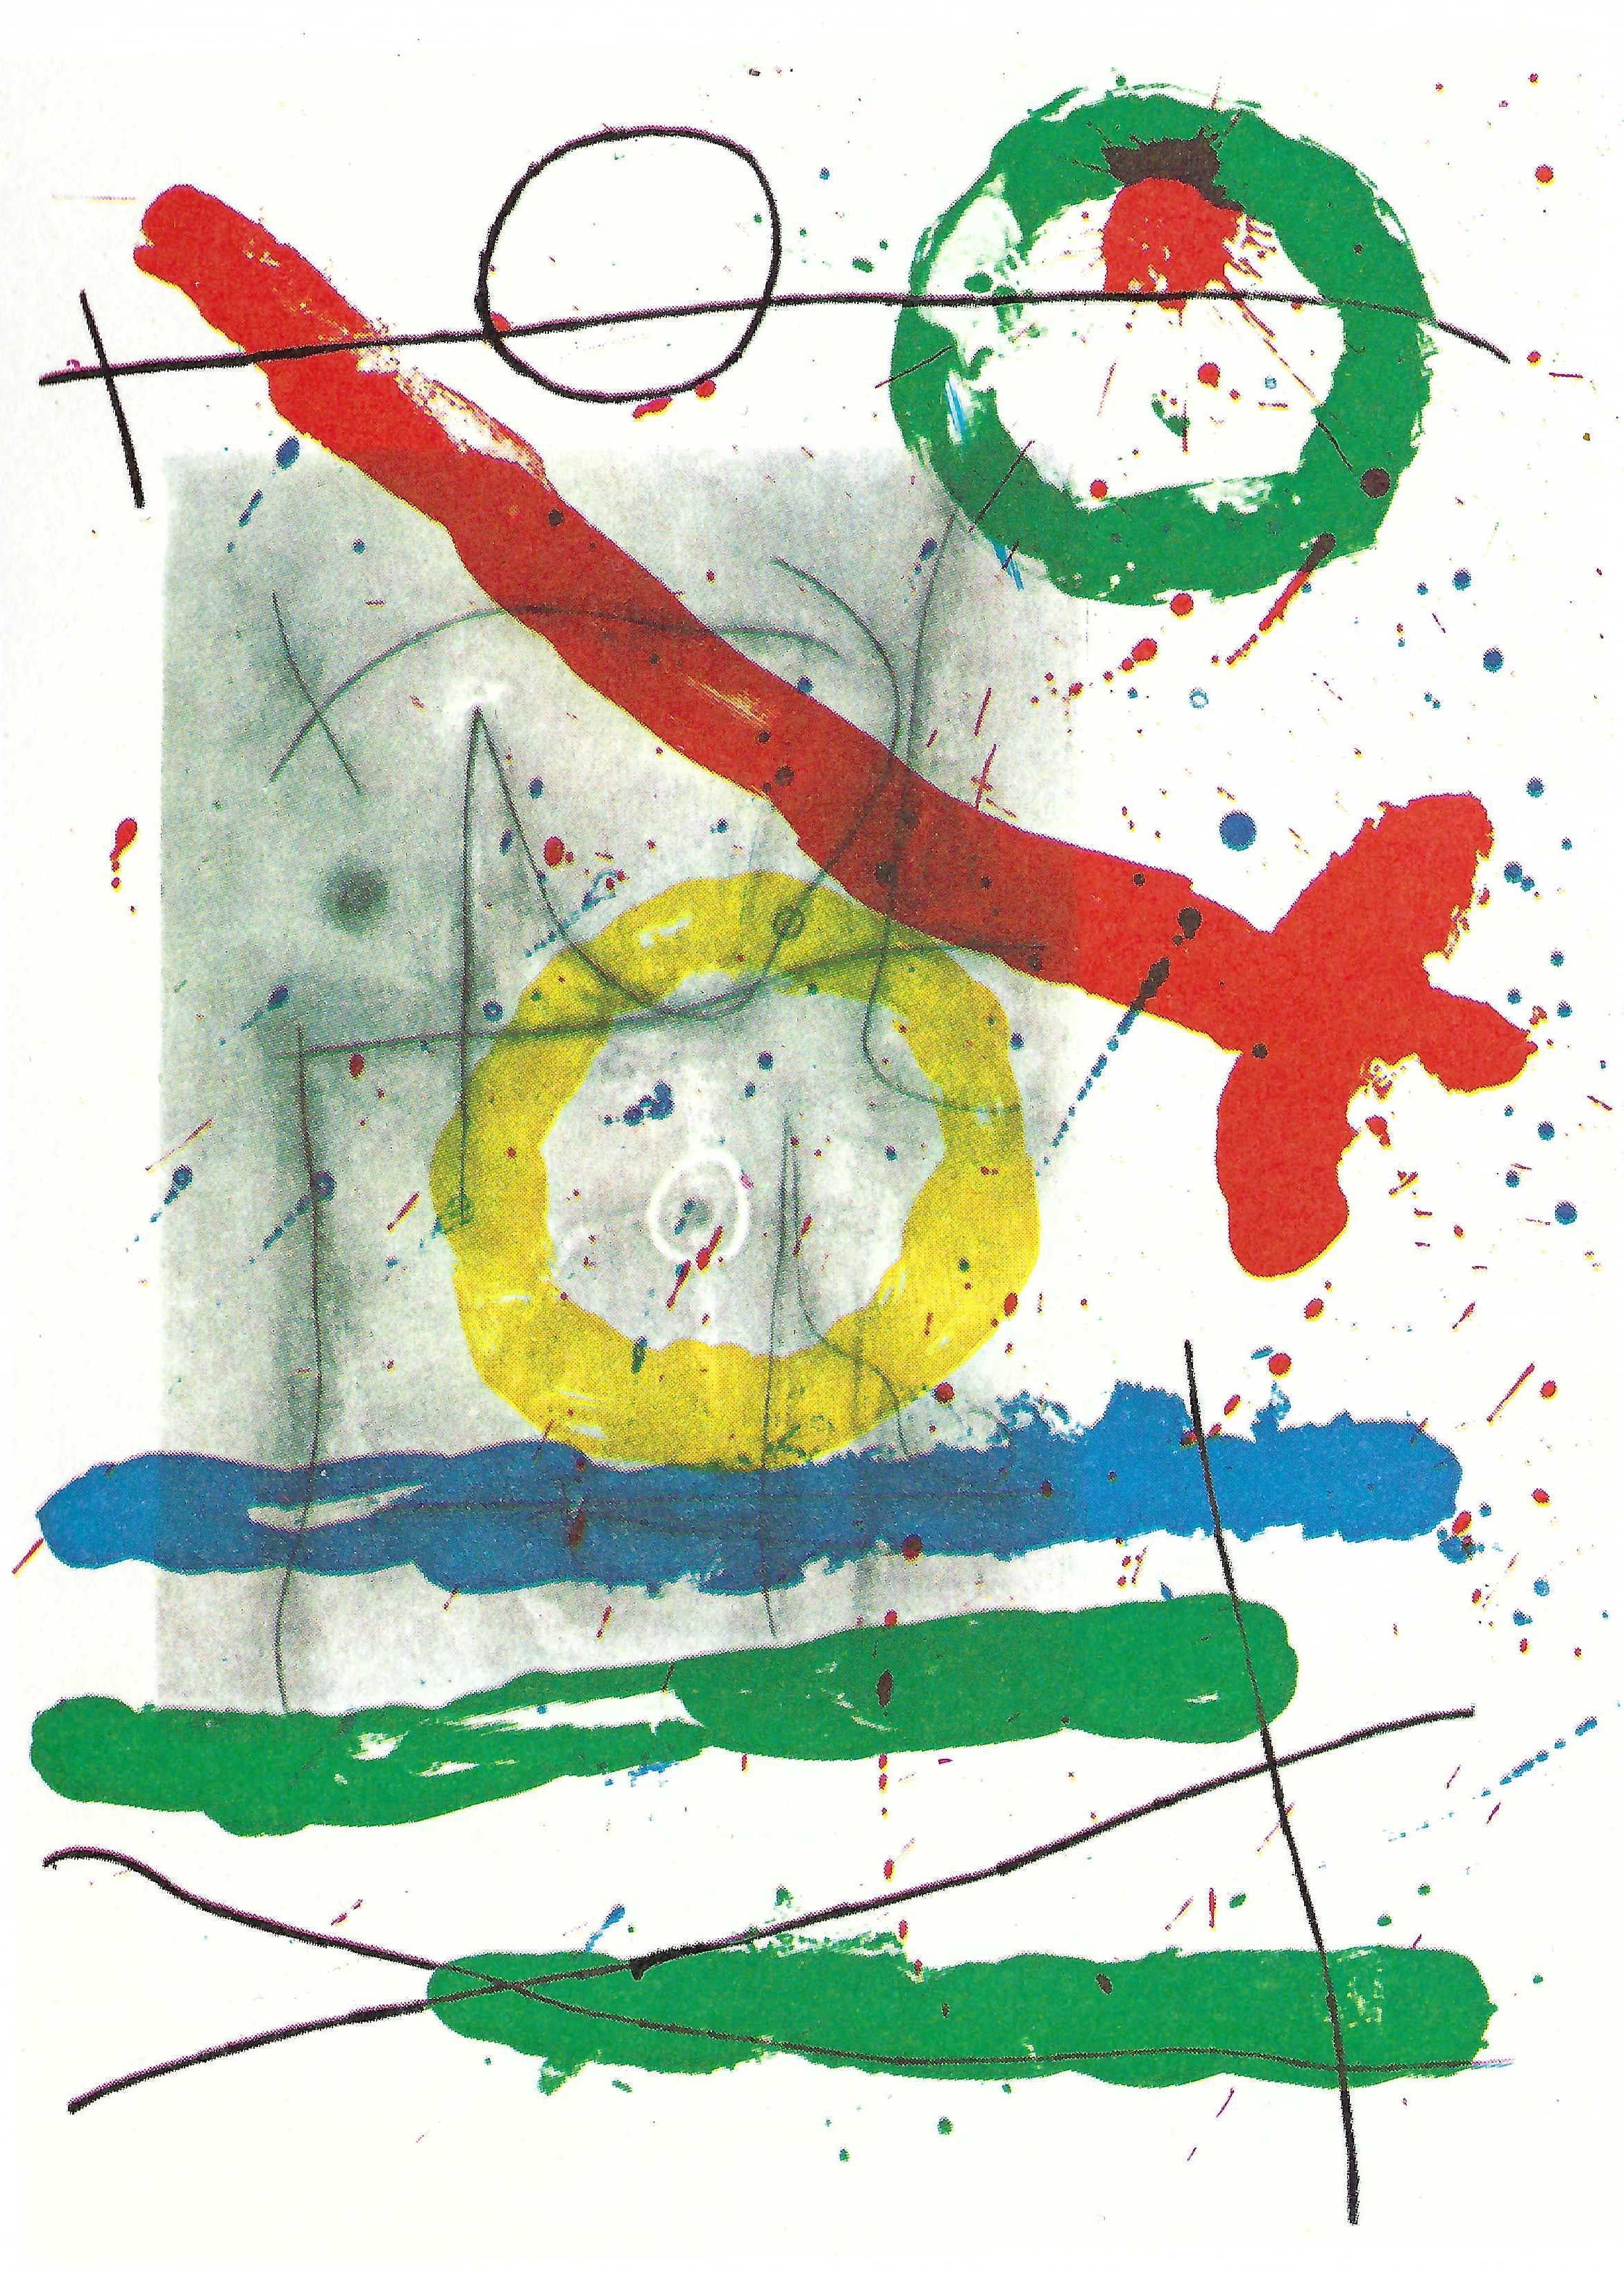 Joan Miró Abstract Print - Plate 15, from 1965 Peintures sur Cartons